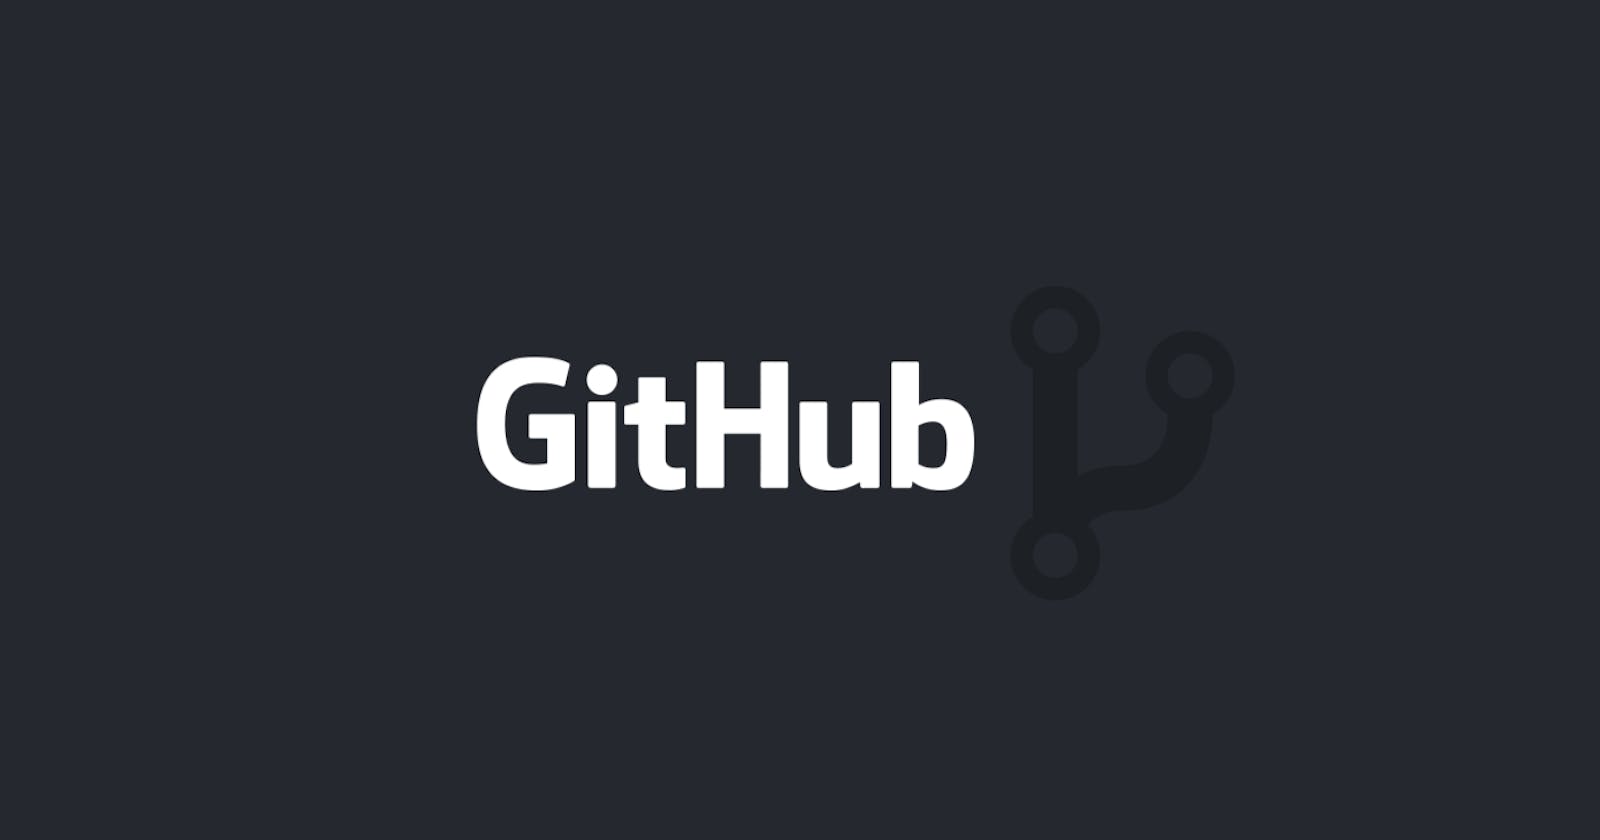 Step-by-Step Guide To Git Push Your Project to GitHub for the First Time